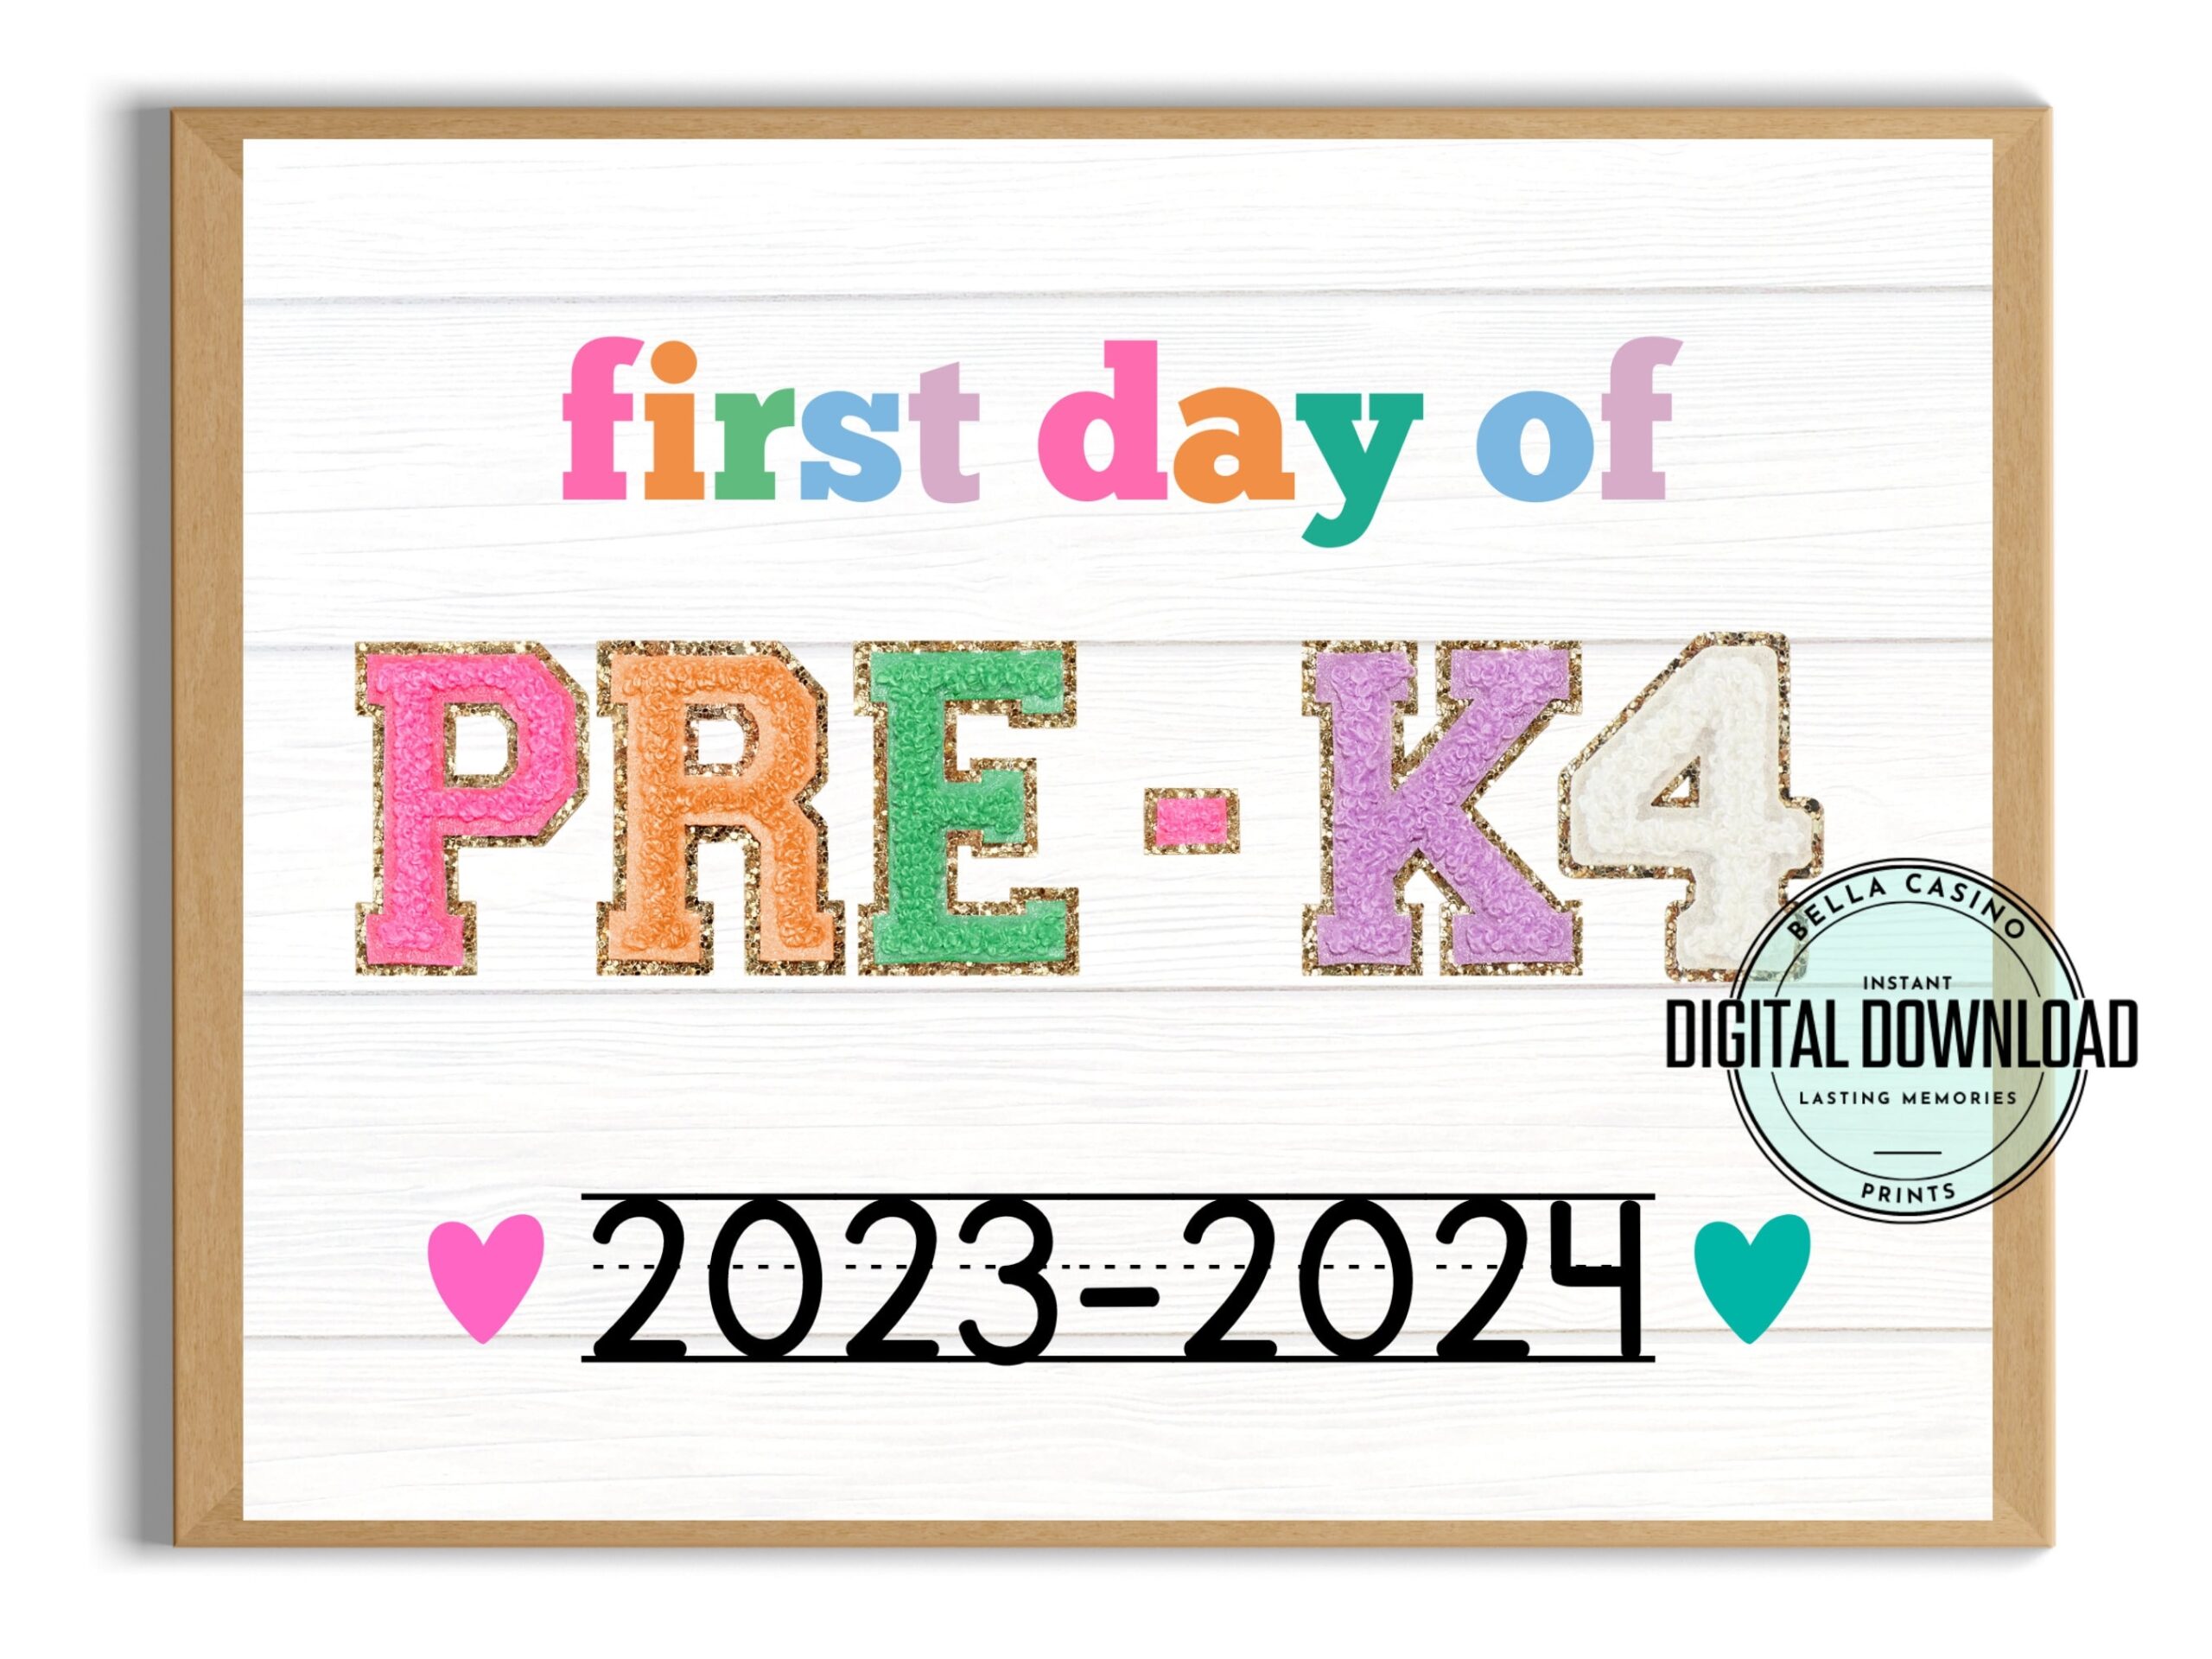 First Day Of Pre k4 Sign First Day Of School Sign Printable Pre k4 Sign Digital Instant Download Etsy